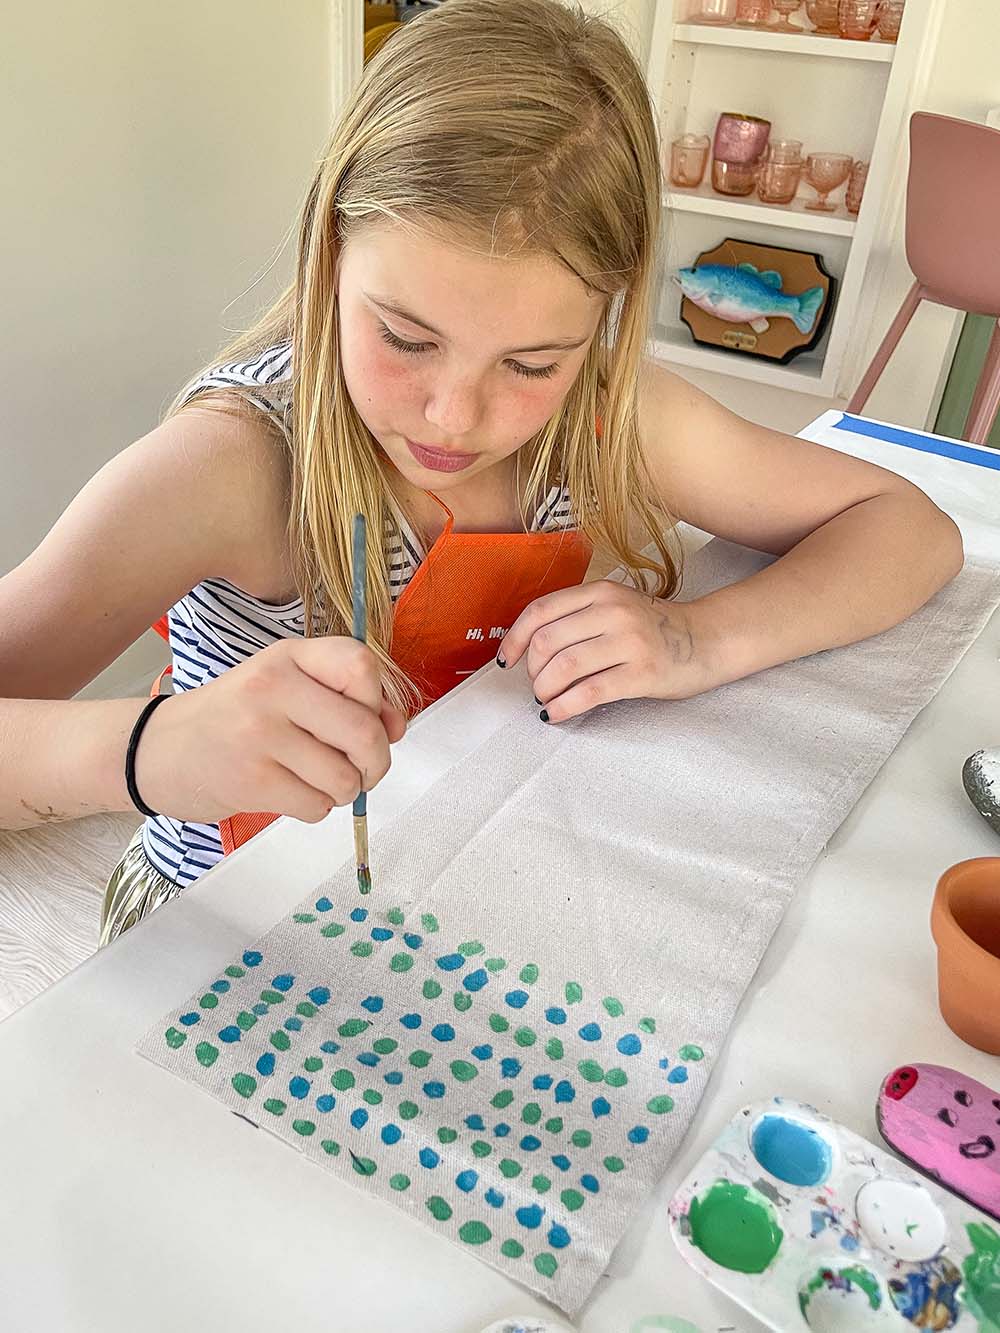 A child painting blue and green dots on a long piece of cloth.